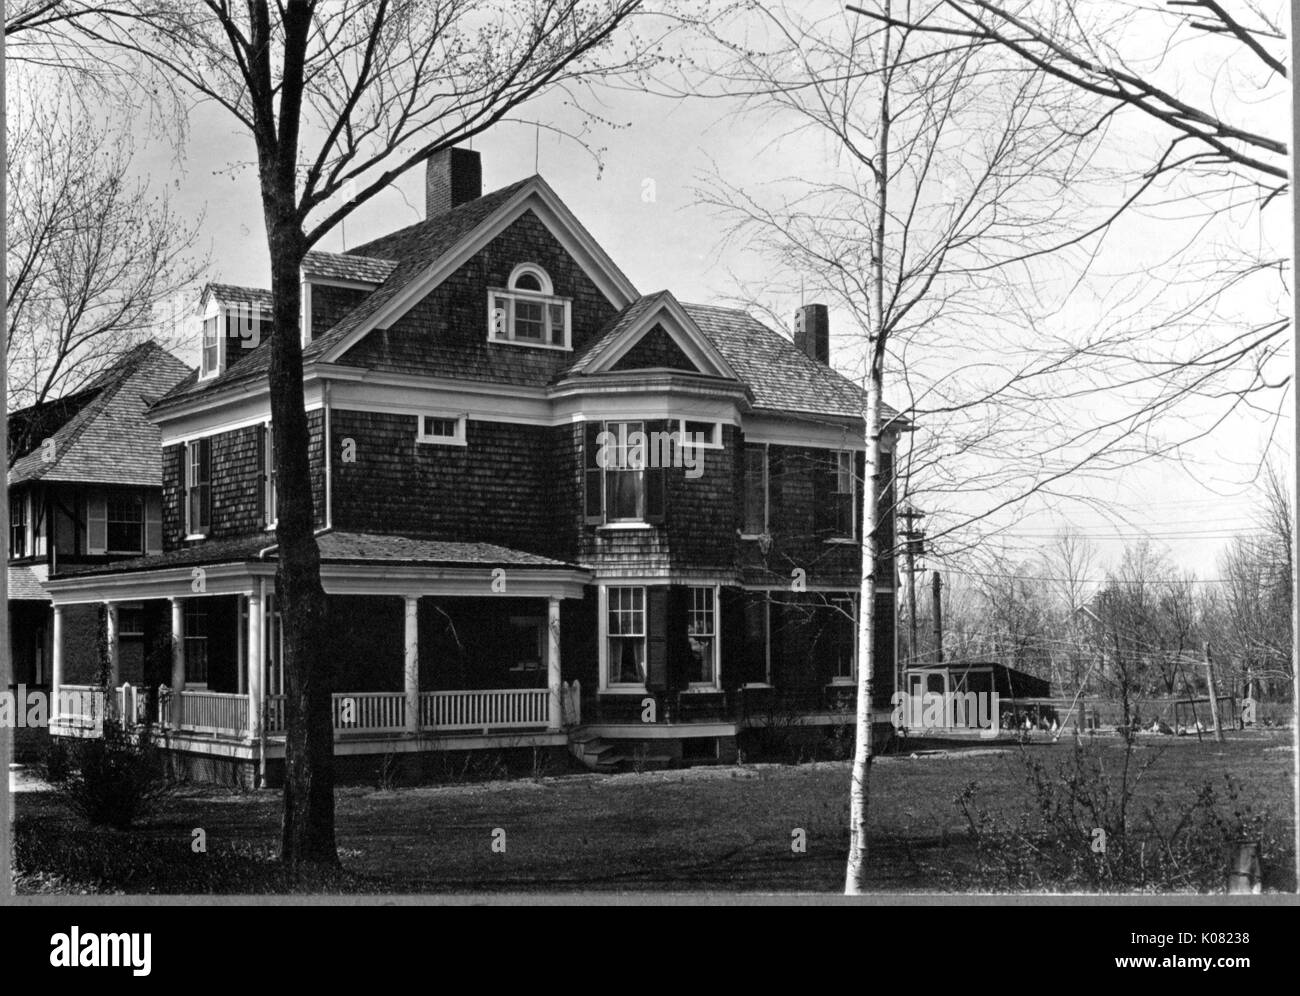 A large single-family home with a large front porch, dormer windows, cedar shingles, chimneys, and and large yard with shrubbery in trees in Baltimore, Maryland, 1910. Stock Photo